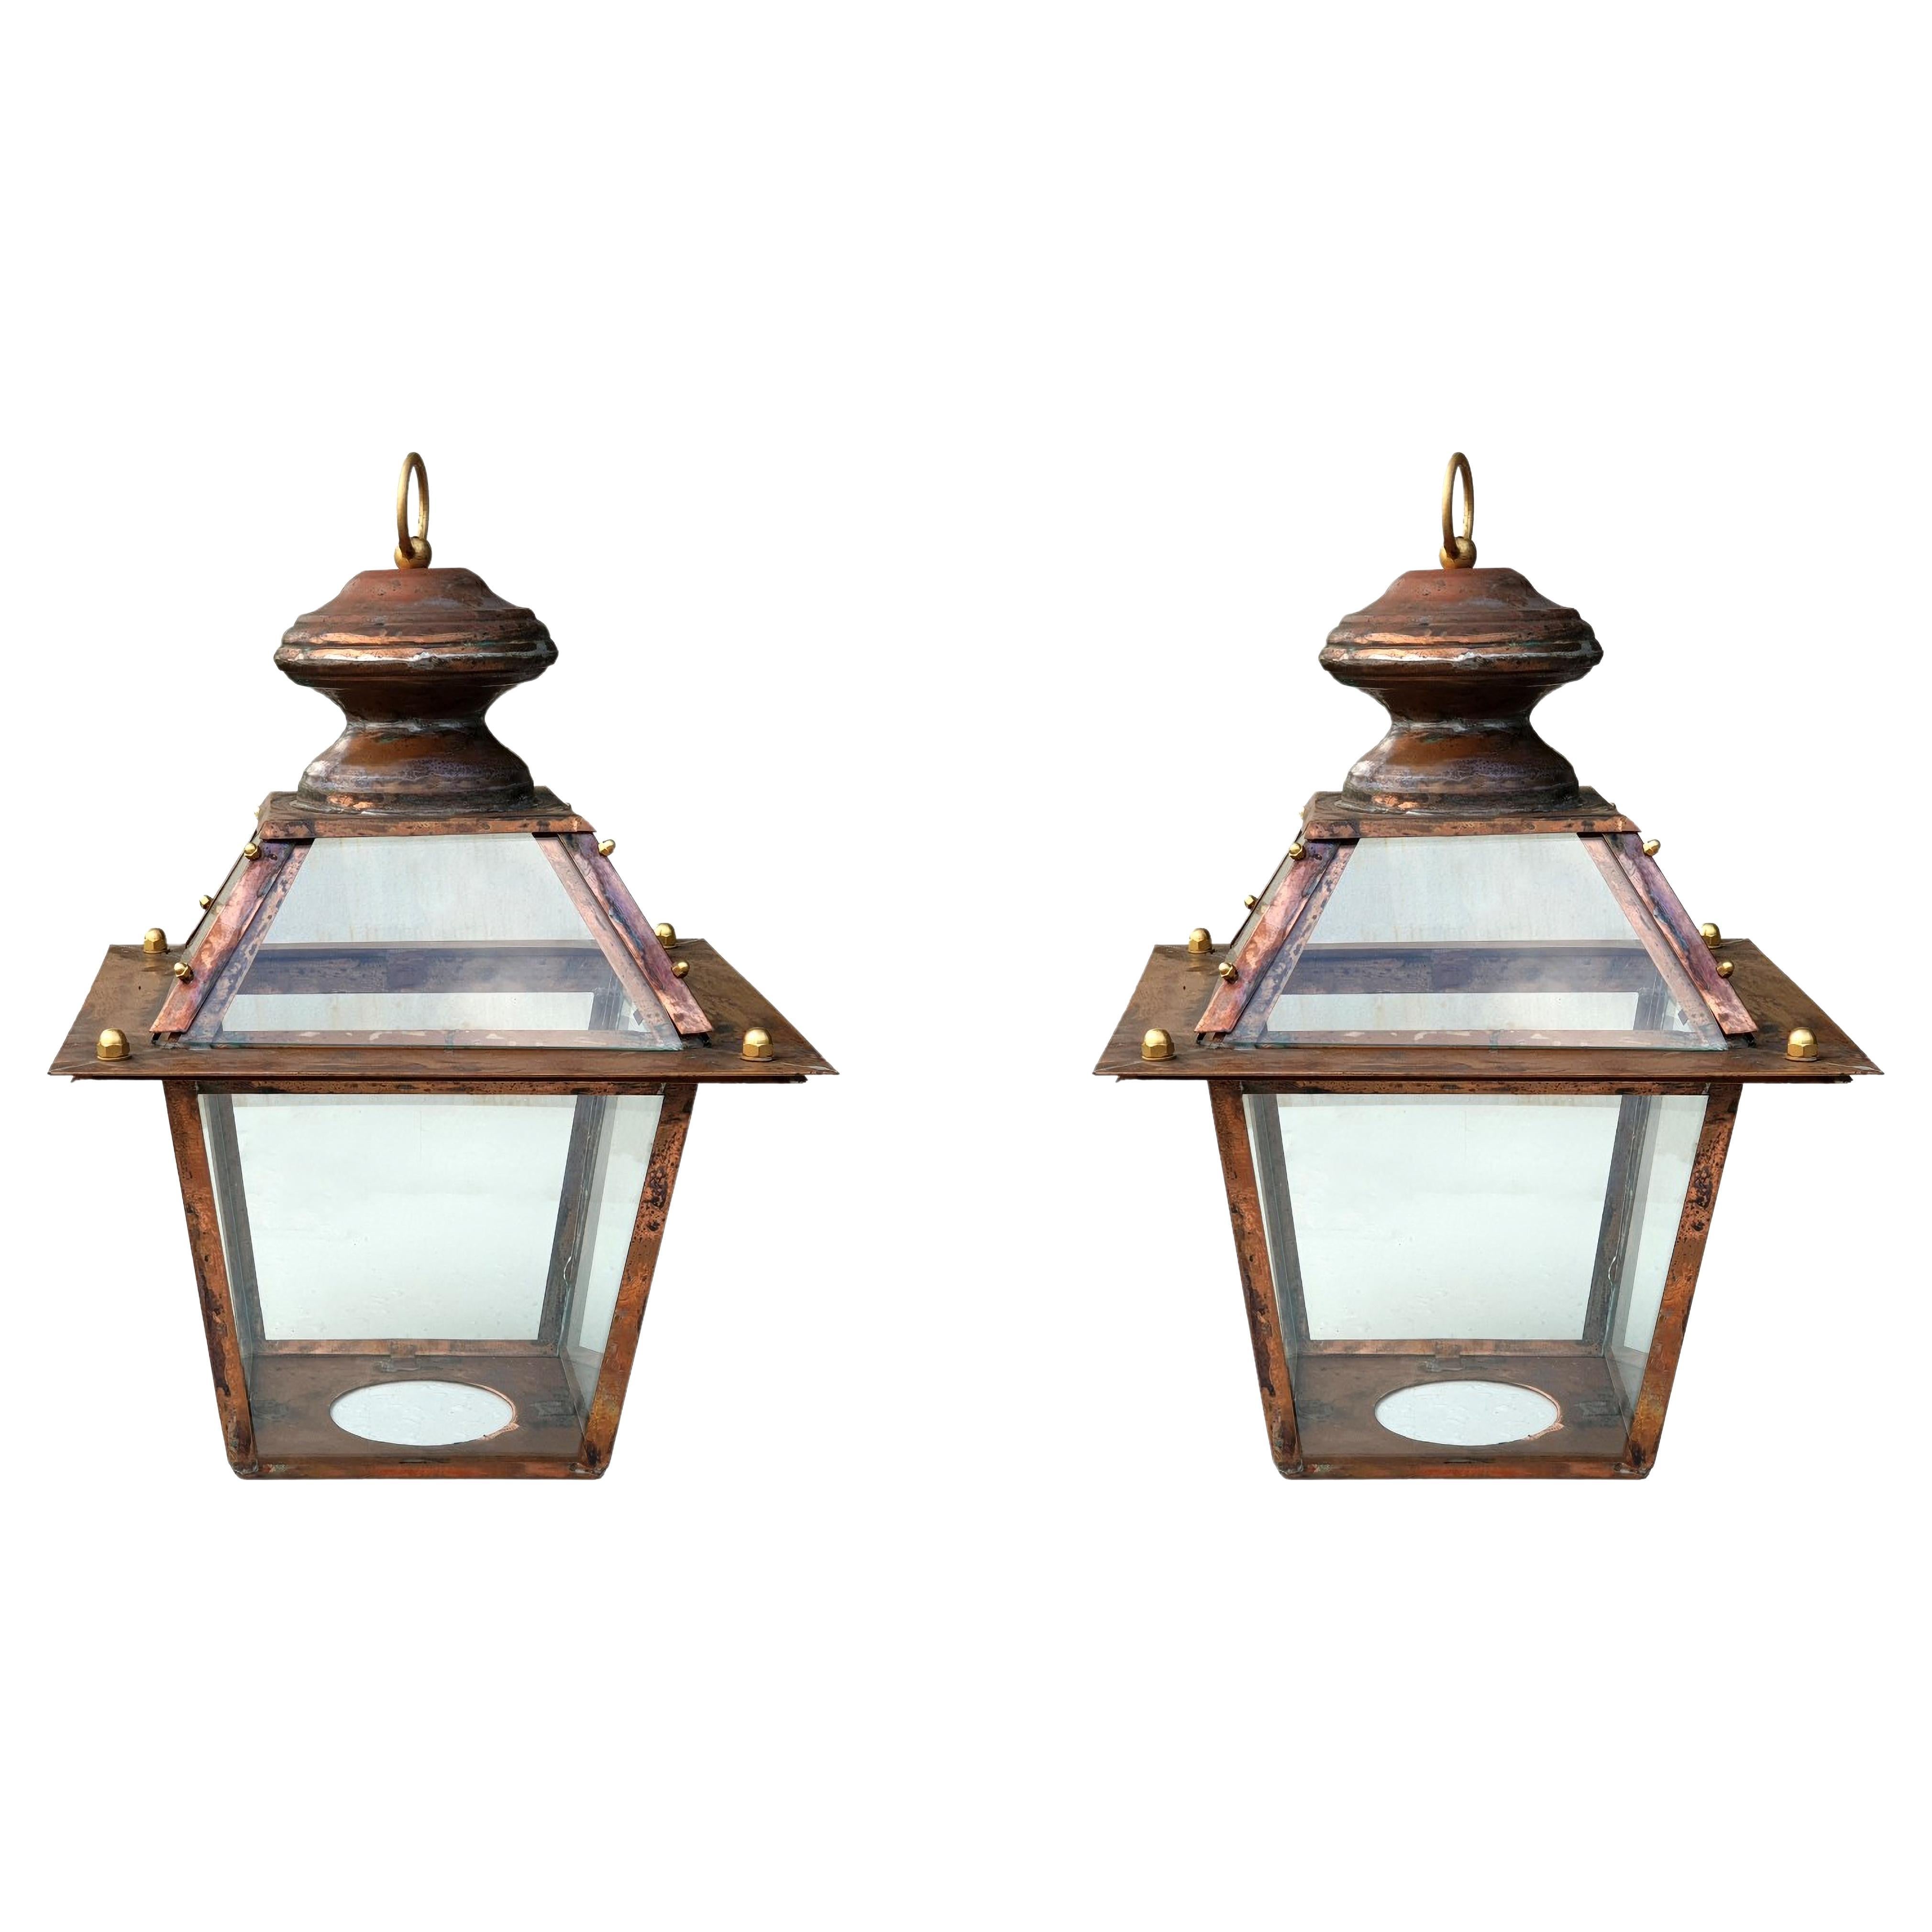 Pair of Italian Lanterns in Tuscan Copper with Ring Early 20th Century For Sale